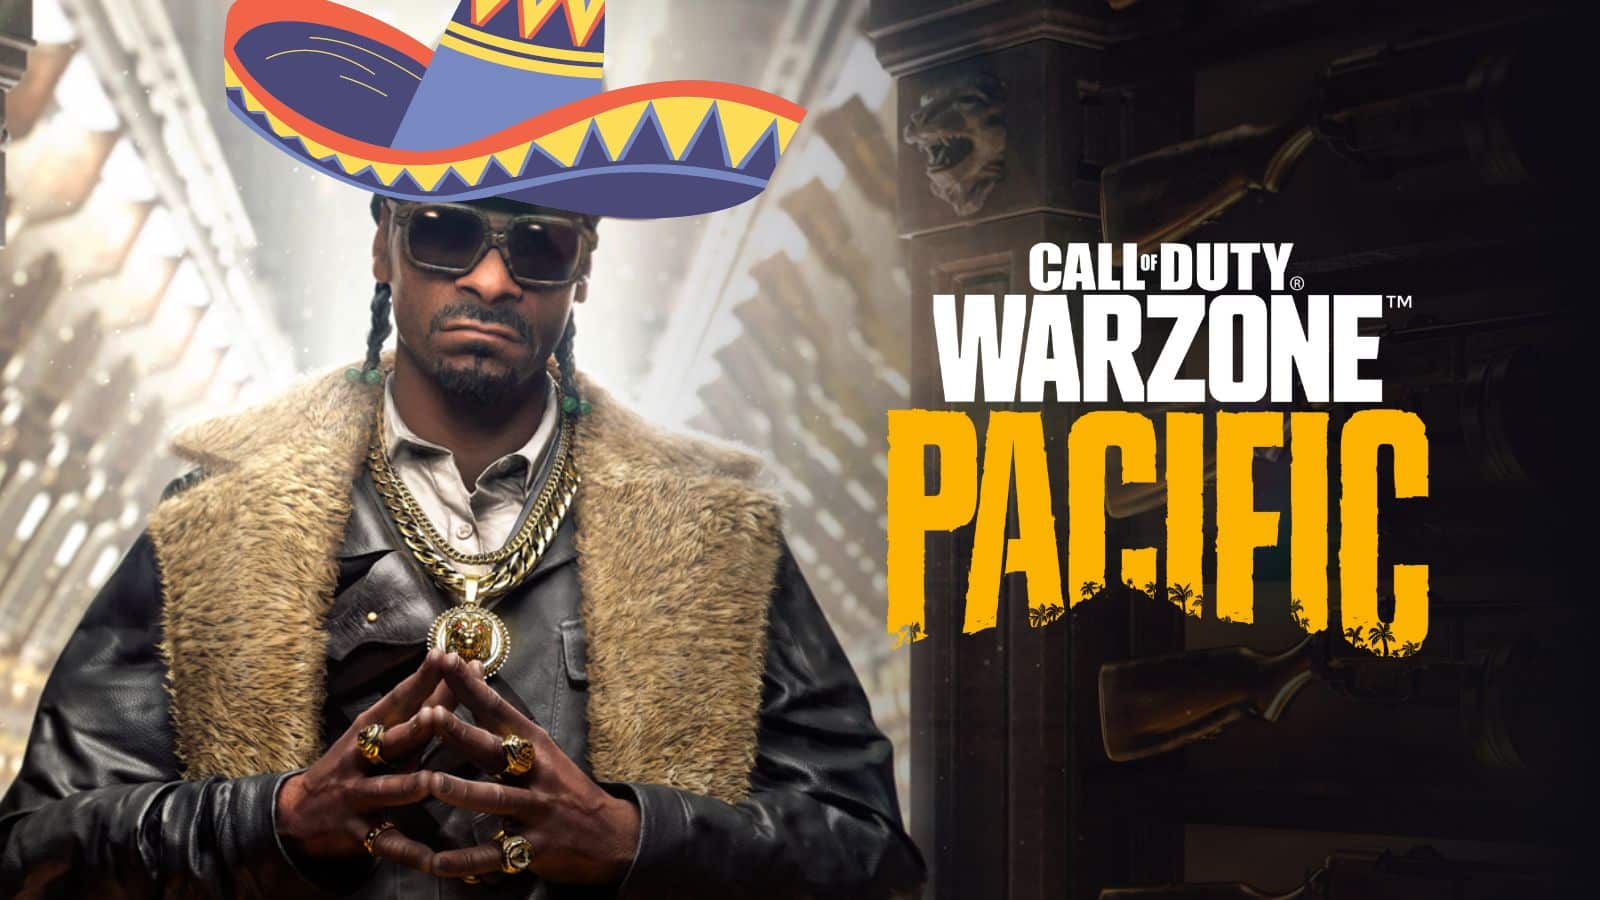 snoop dogg in warzone with mariachi hat